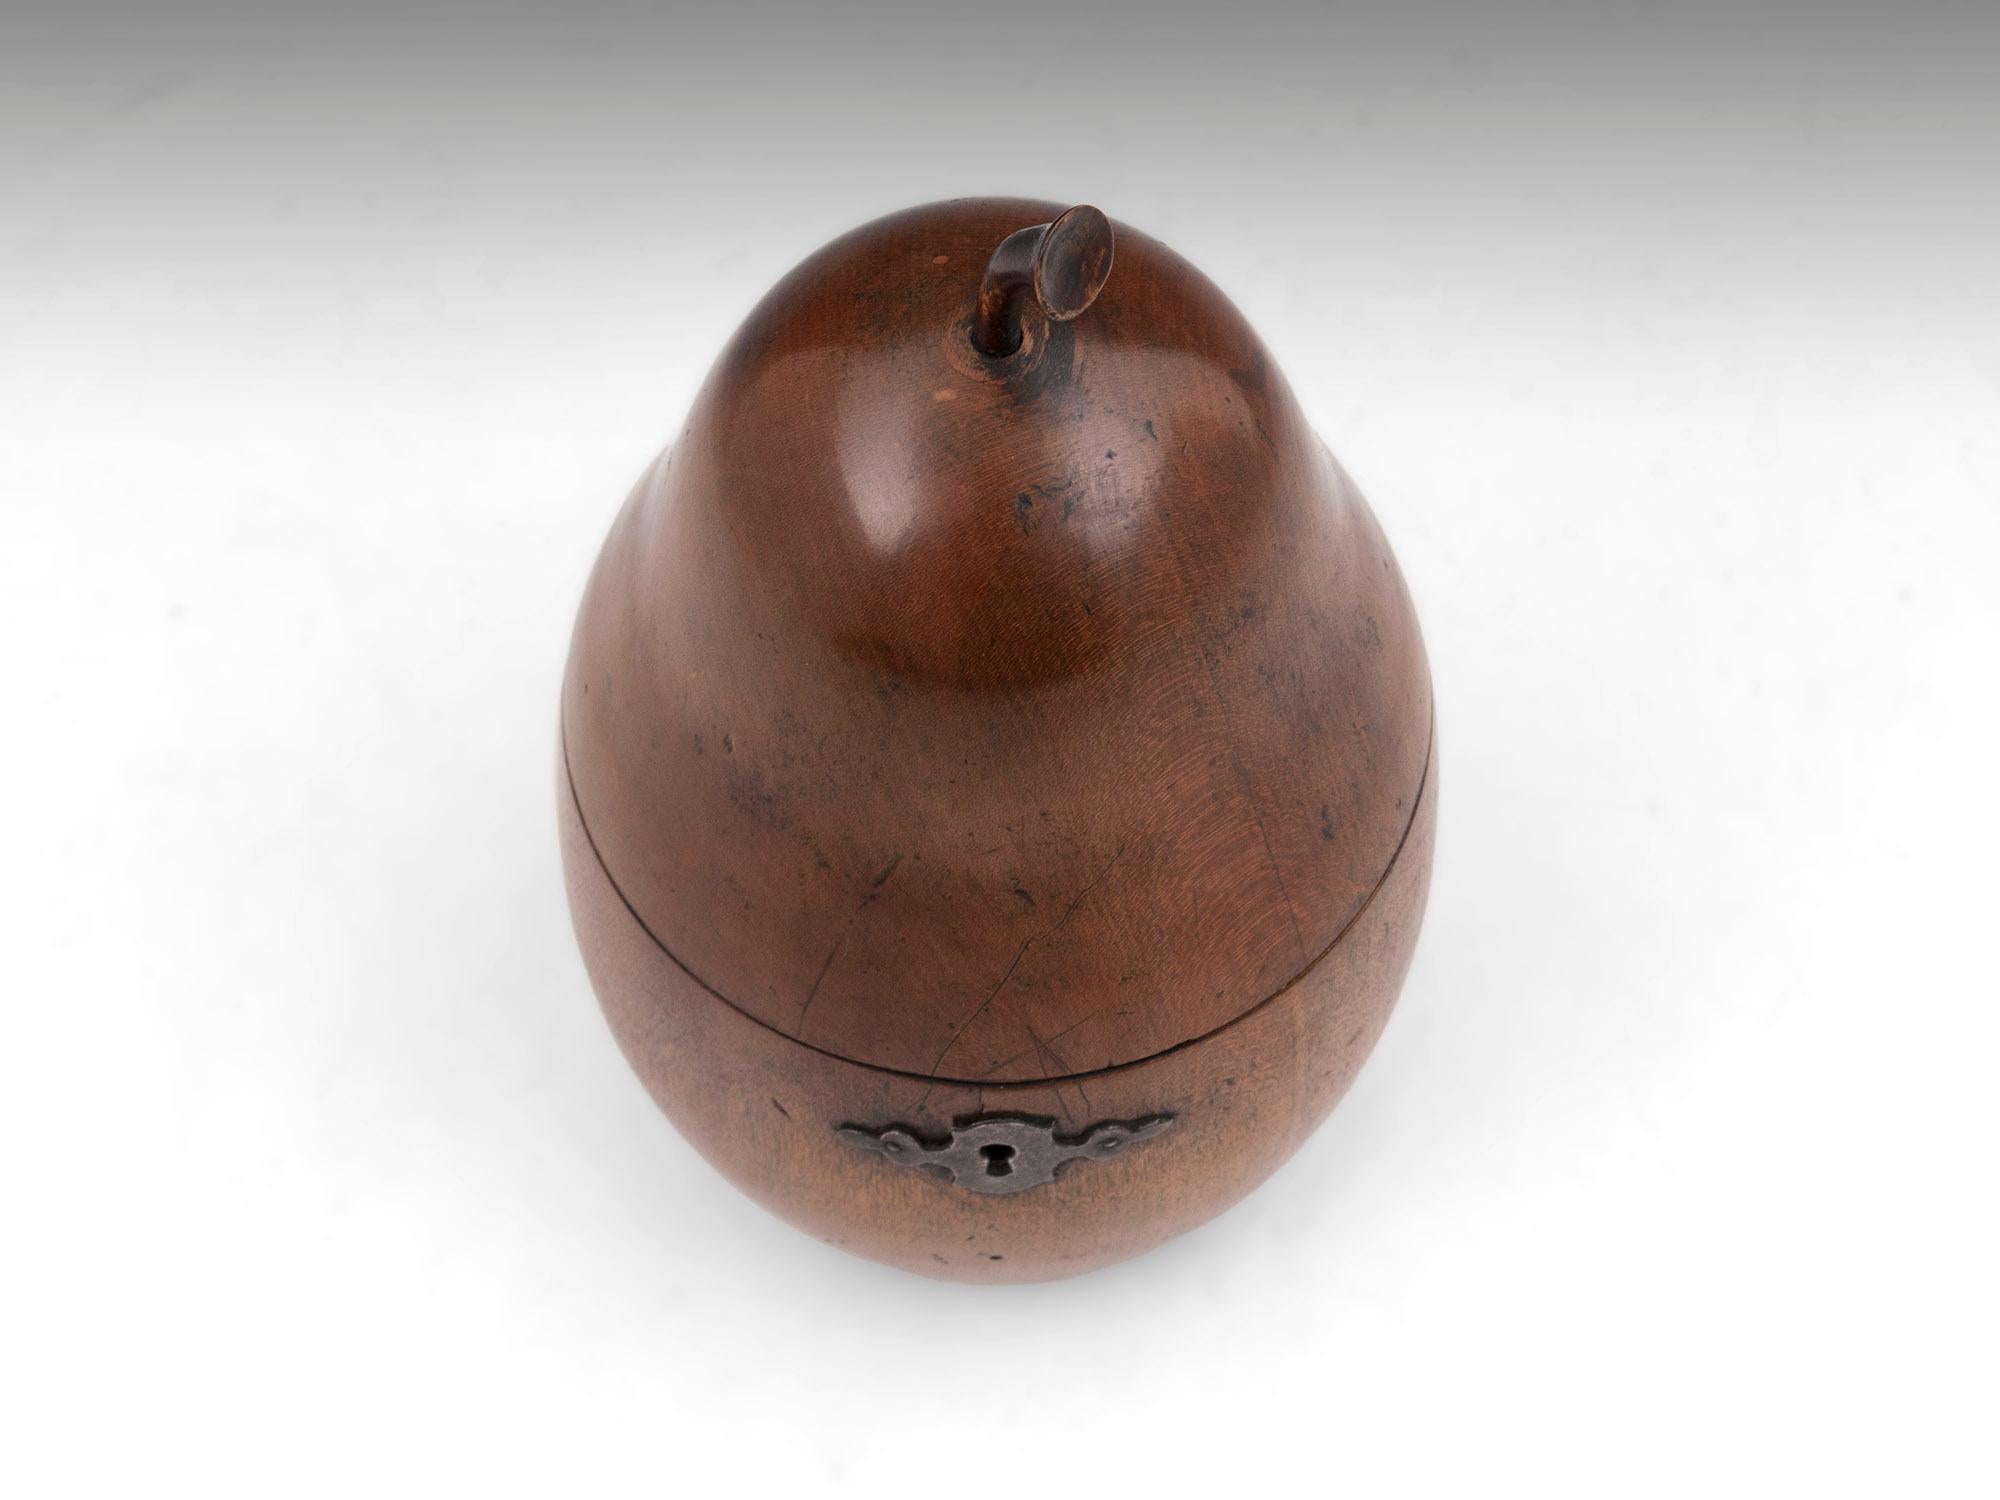 Antique Pear Fruit Treen Tea Caddy In Good Condition For Sale In Northampton, United Kingdom